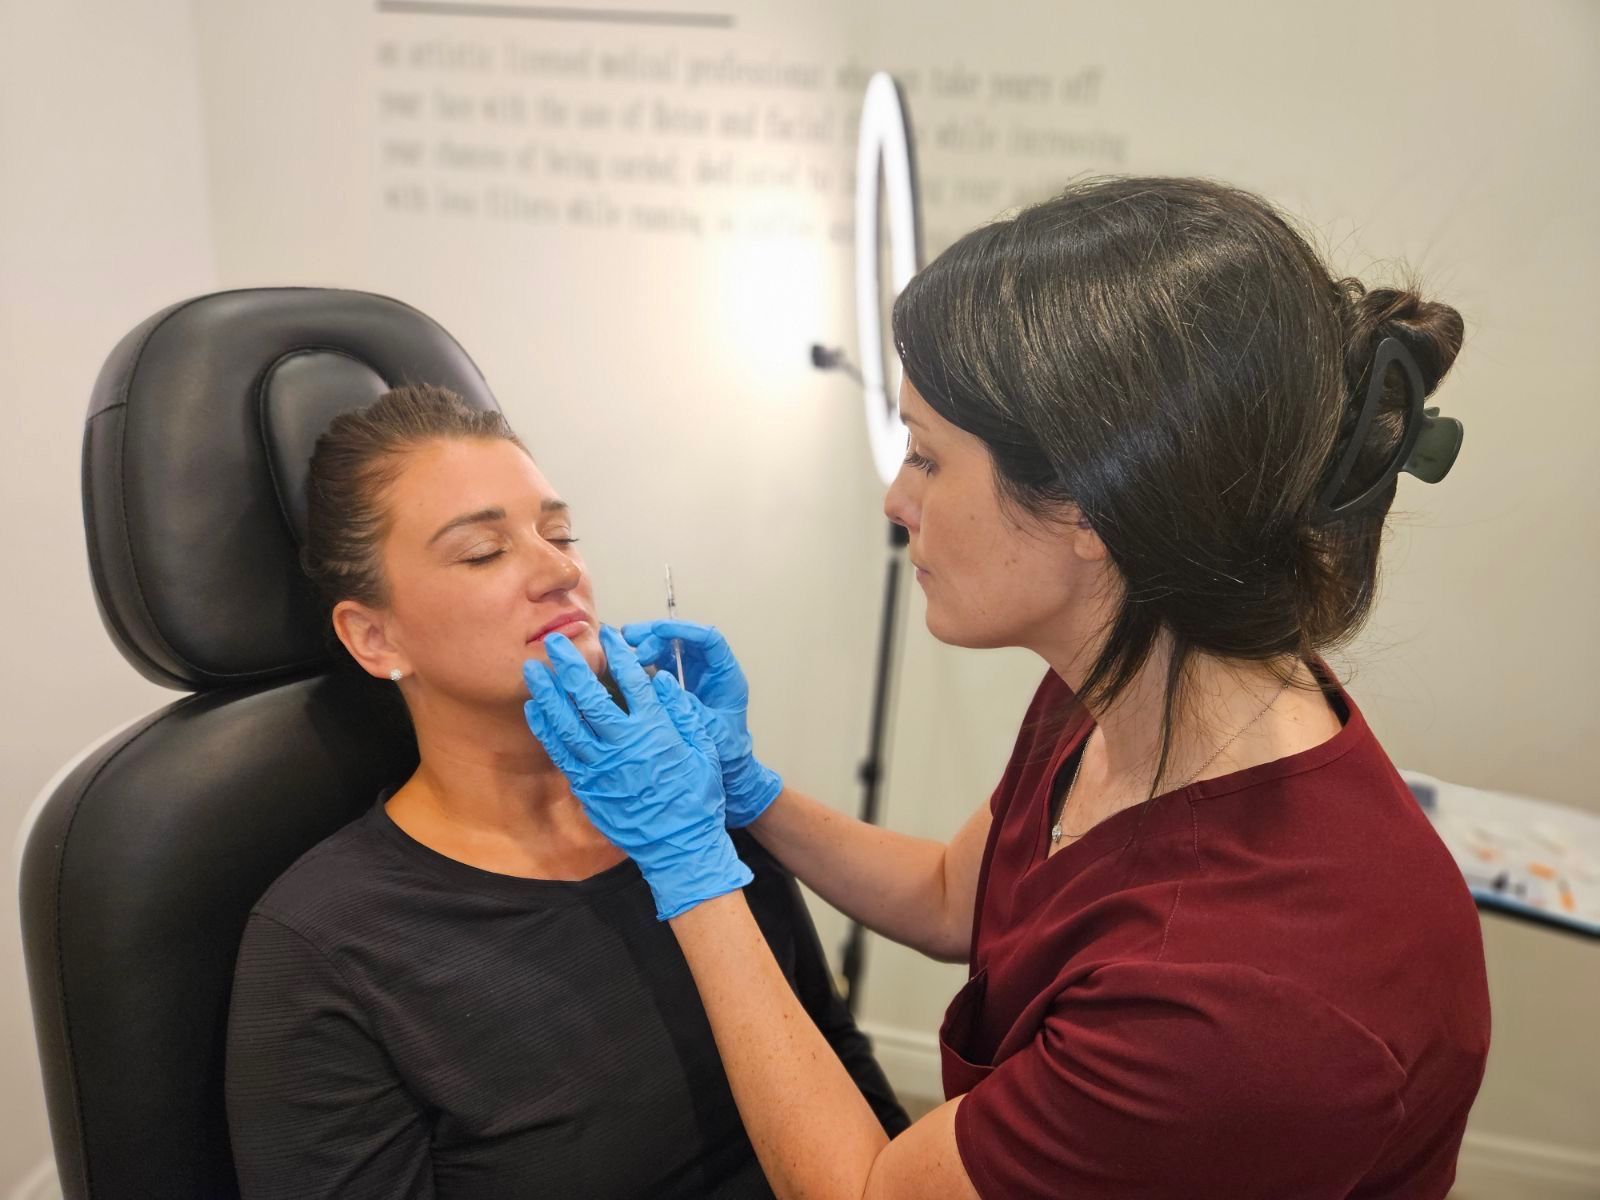 A woman is getting a botox injection in her lip while sitting in a chair.